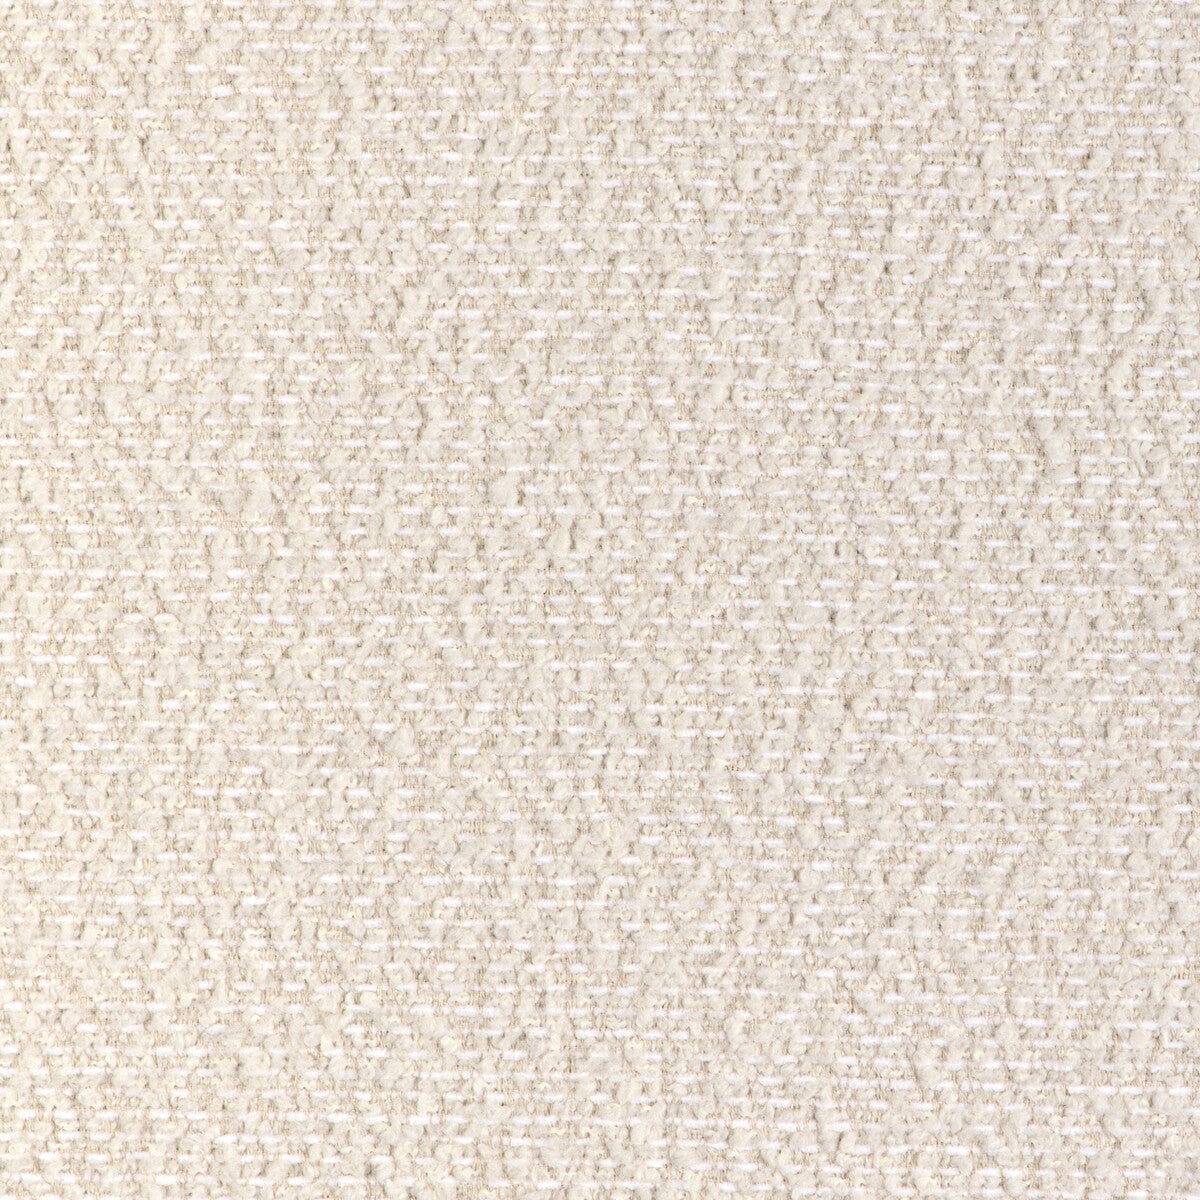 Kravet Design fabric in 36973-1601 color - pattern 36973.1601.0 - by Kravet Design in the Sustainable Textures II collection